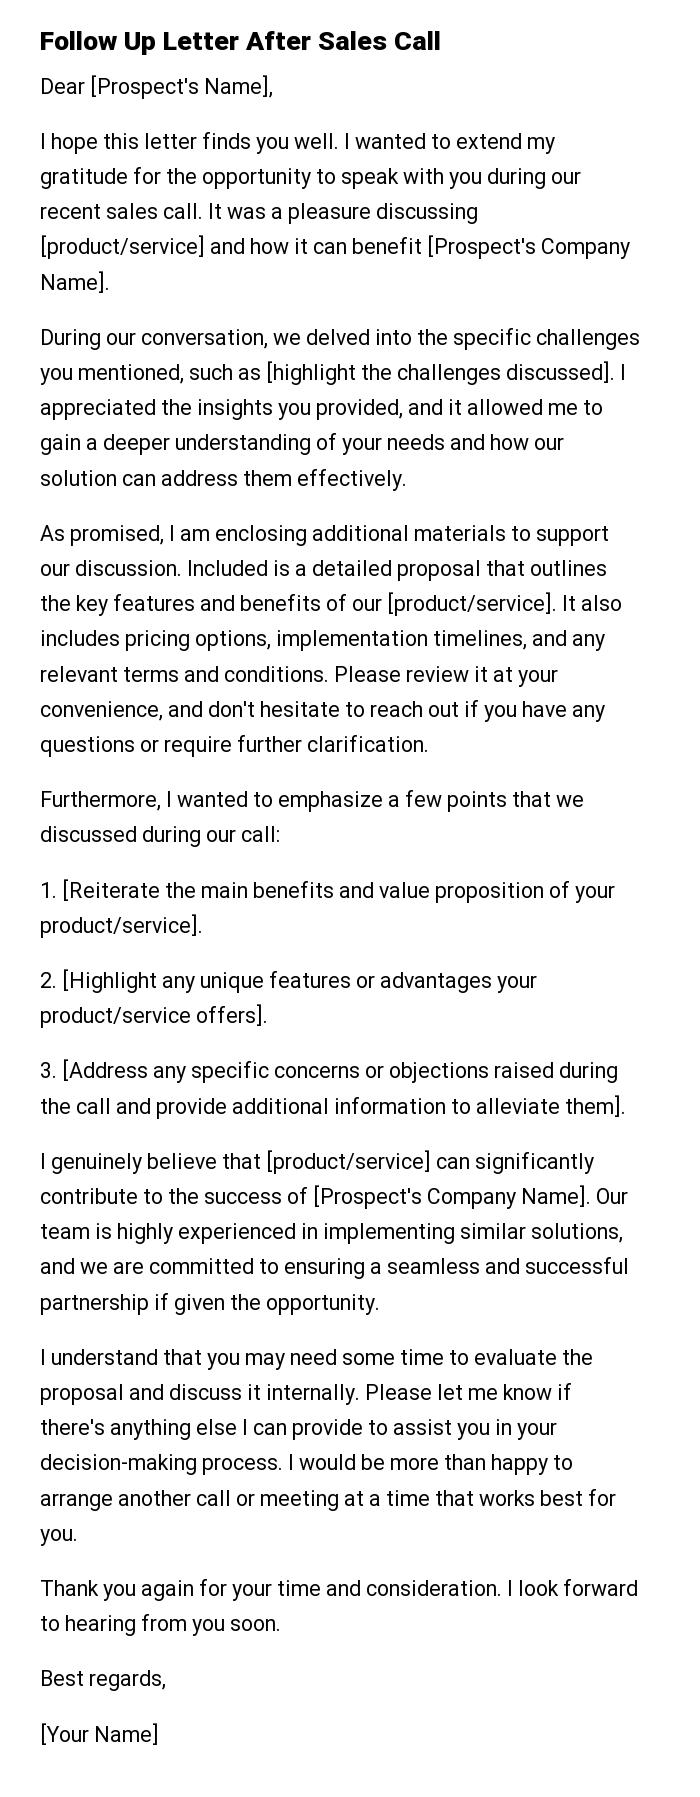 Follow Up Letter After Sales Call